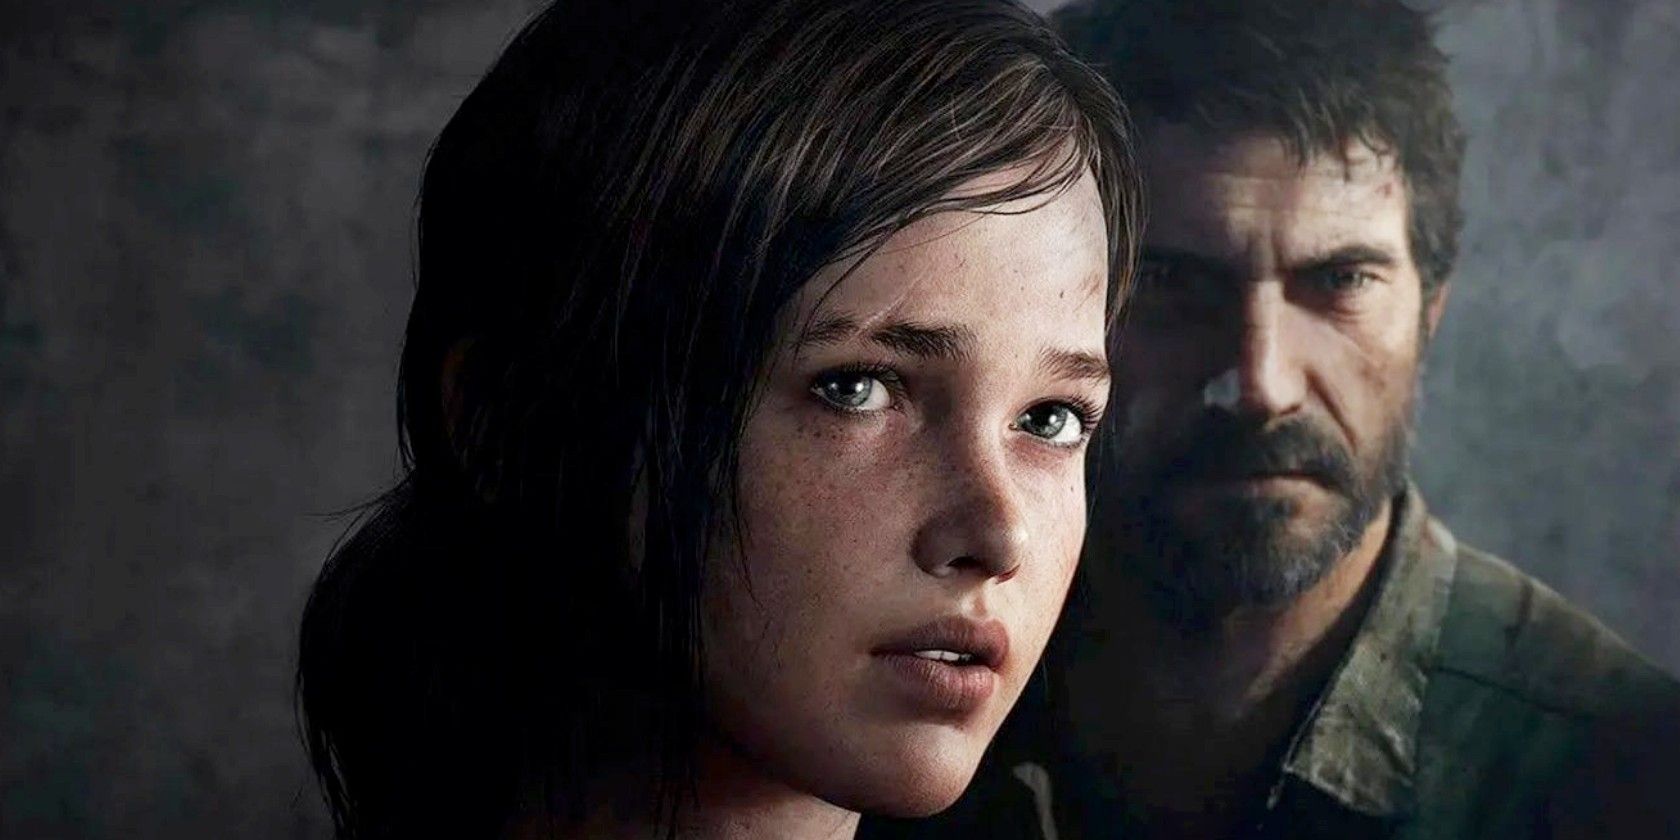 The Last of Us HBO Series Set Photo Offers First Real Look at Joel